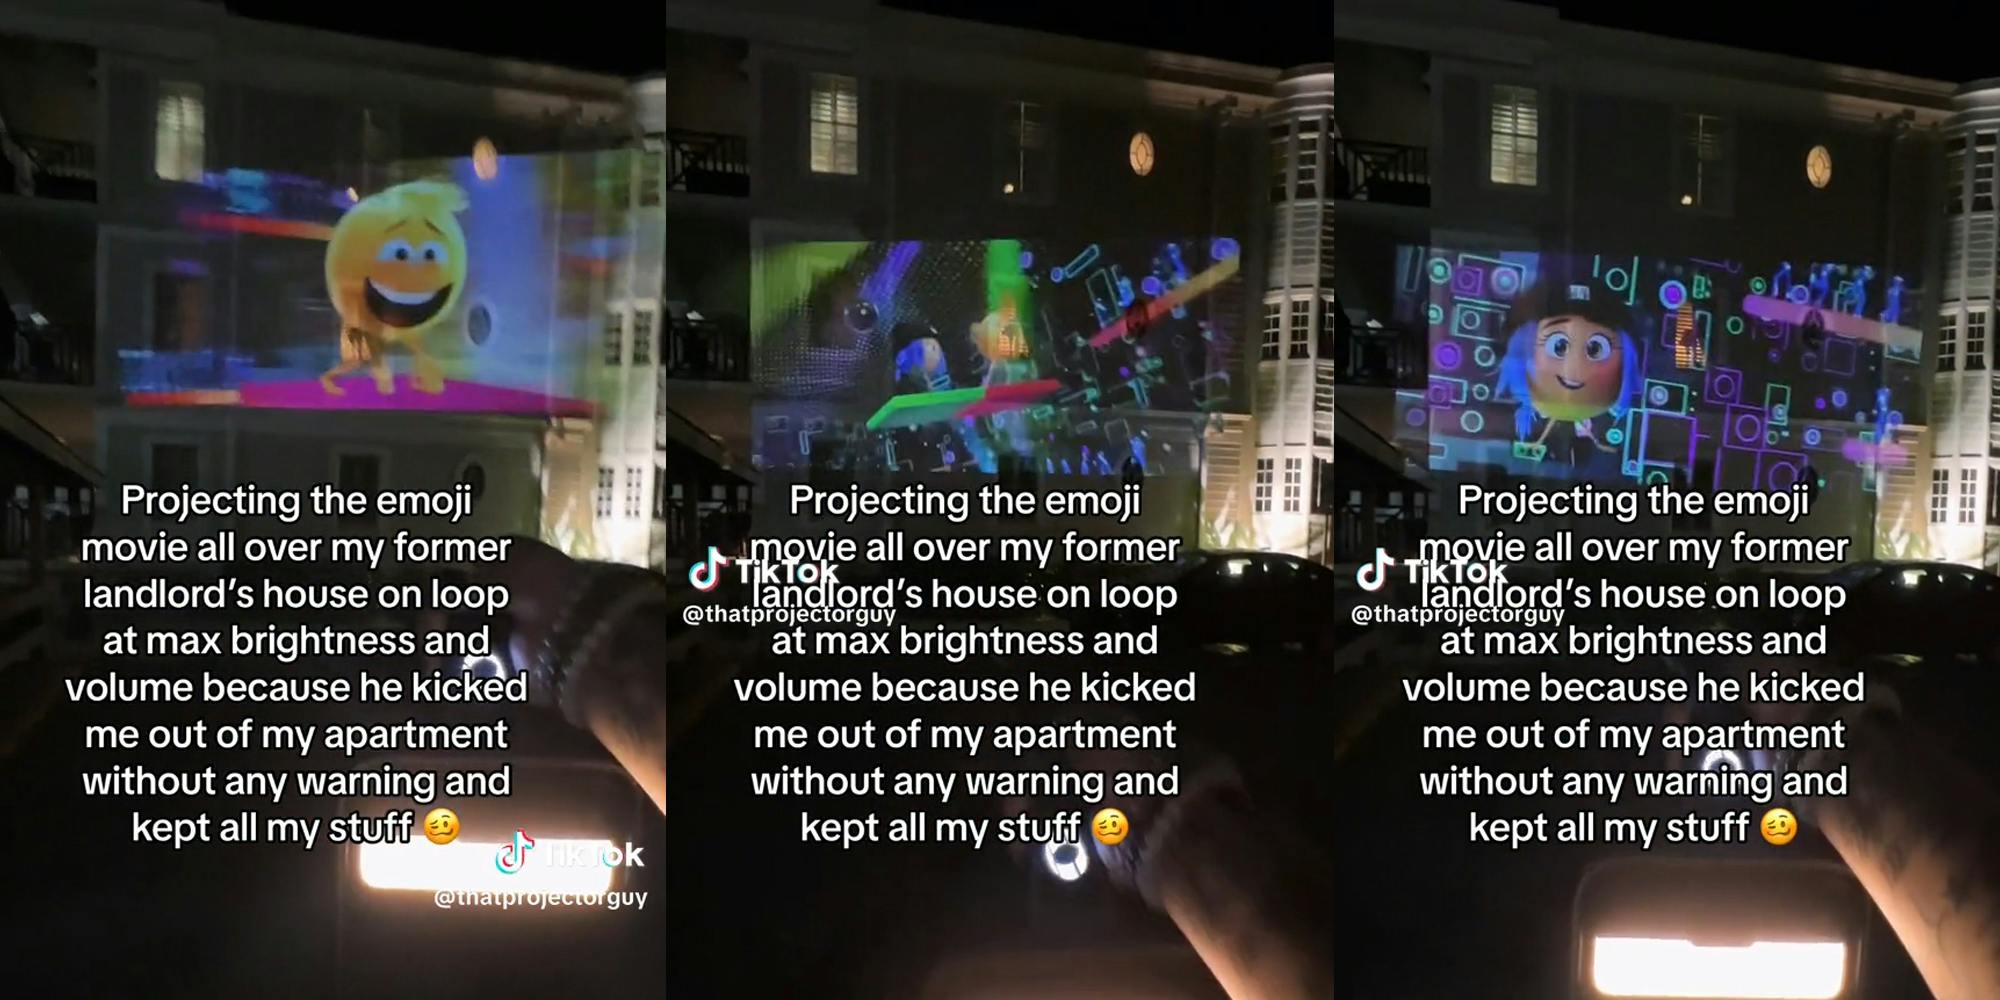 man projecting the emoji movie onto house with caption "Projecting the emoji movie all over my former landlord's house on loop at max brightness and volume because he kicked me out of my apartment without any warning and kept all my stuff"